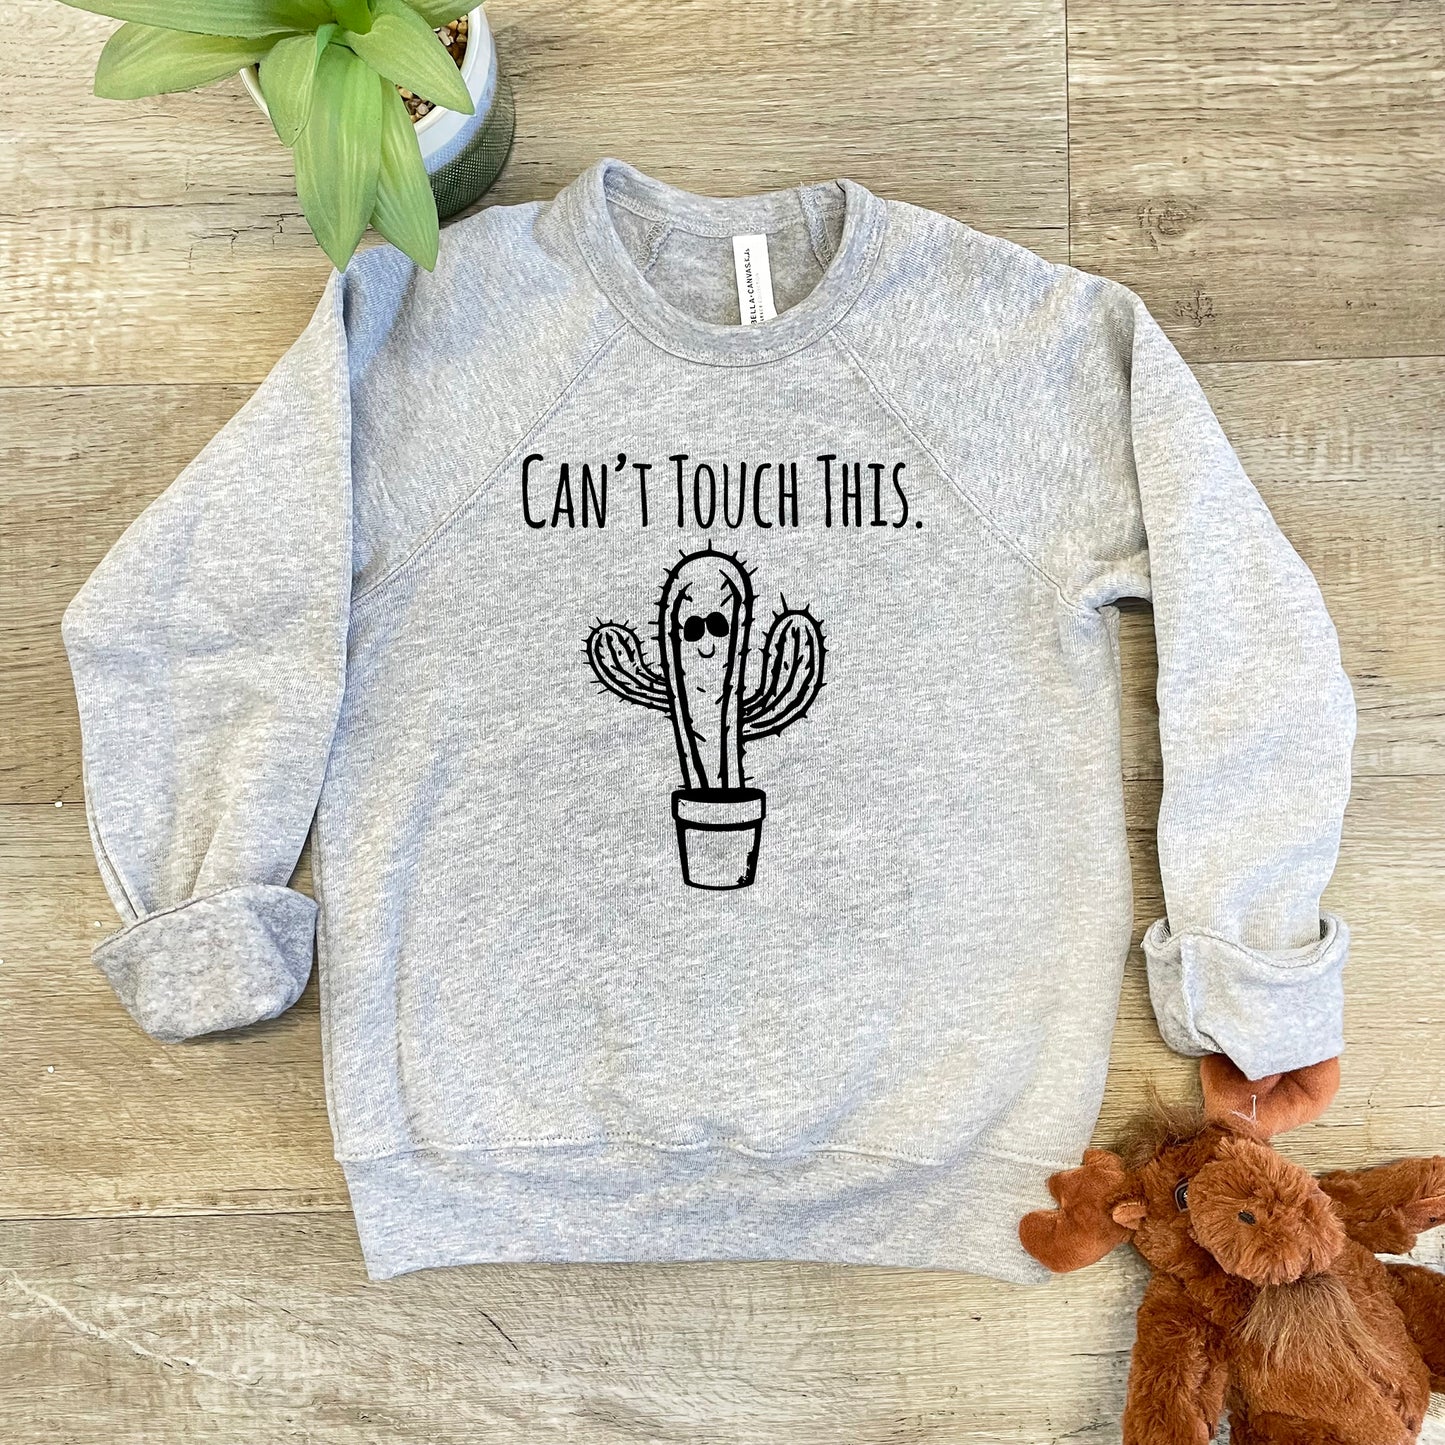 Can't Touch This (Cactus) - Kid's Sweatshirt - Heather Gray or Mauve